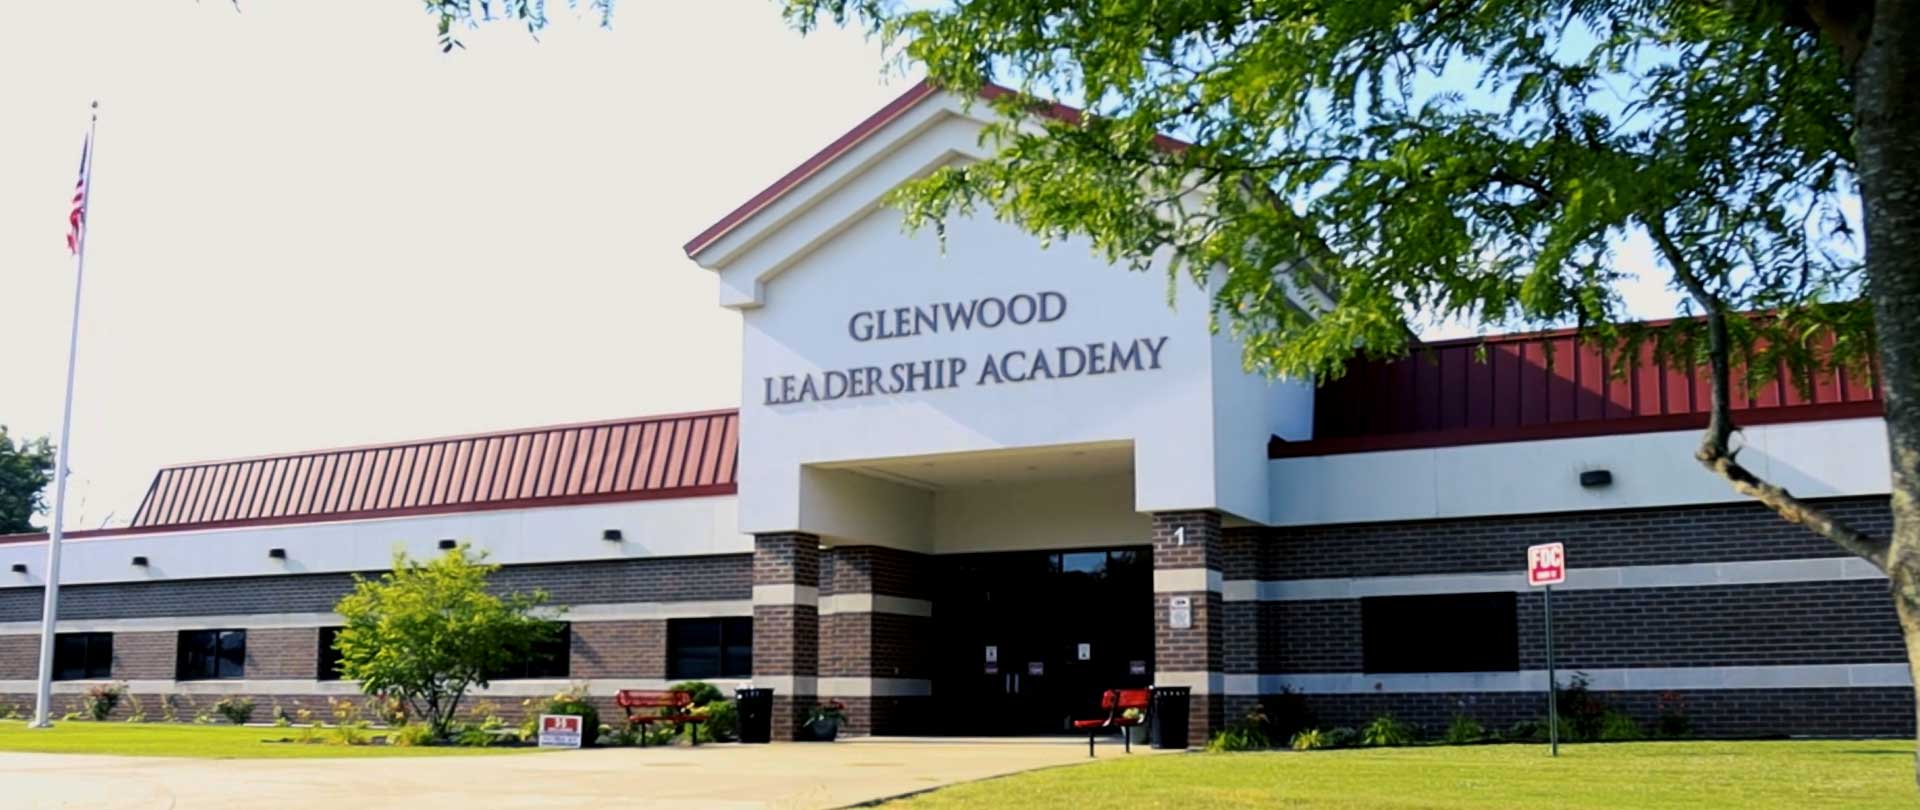 Glenwood Leadership Academy
Inspiring and empowering students through innovative instruction and meaningful relationships to reach their academic potential
